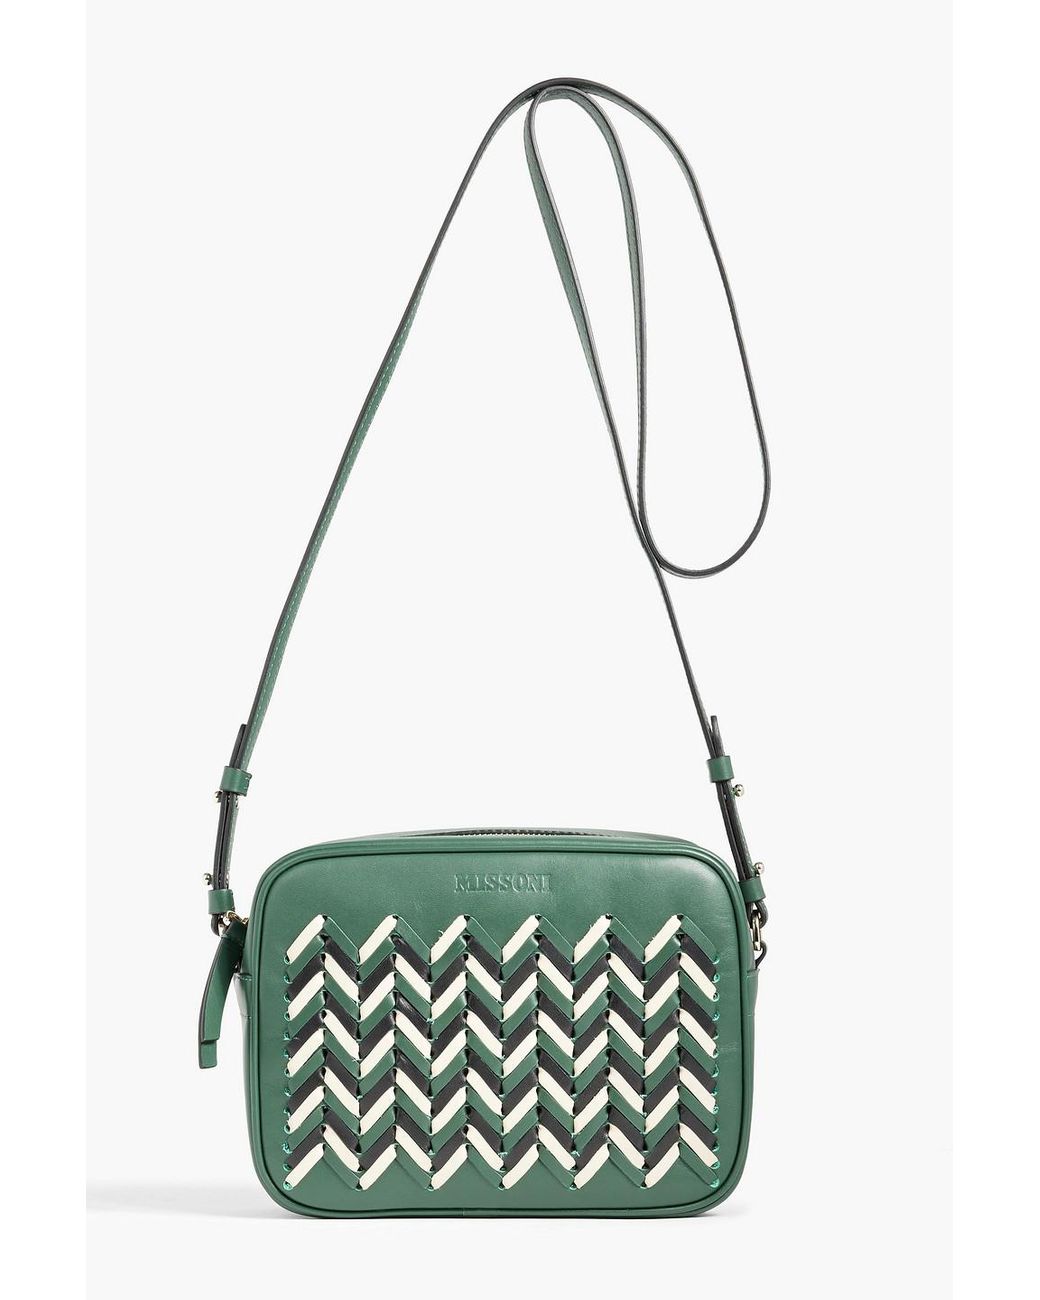 Missoni Woven Leather Shoulder Bag in White | Lyst